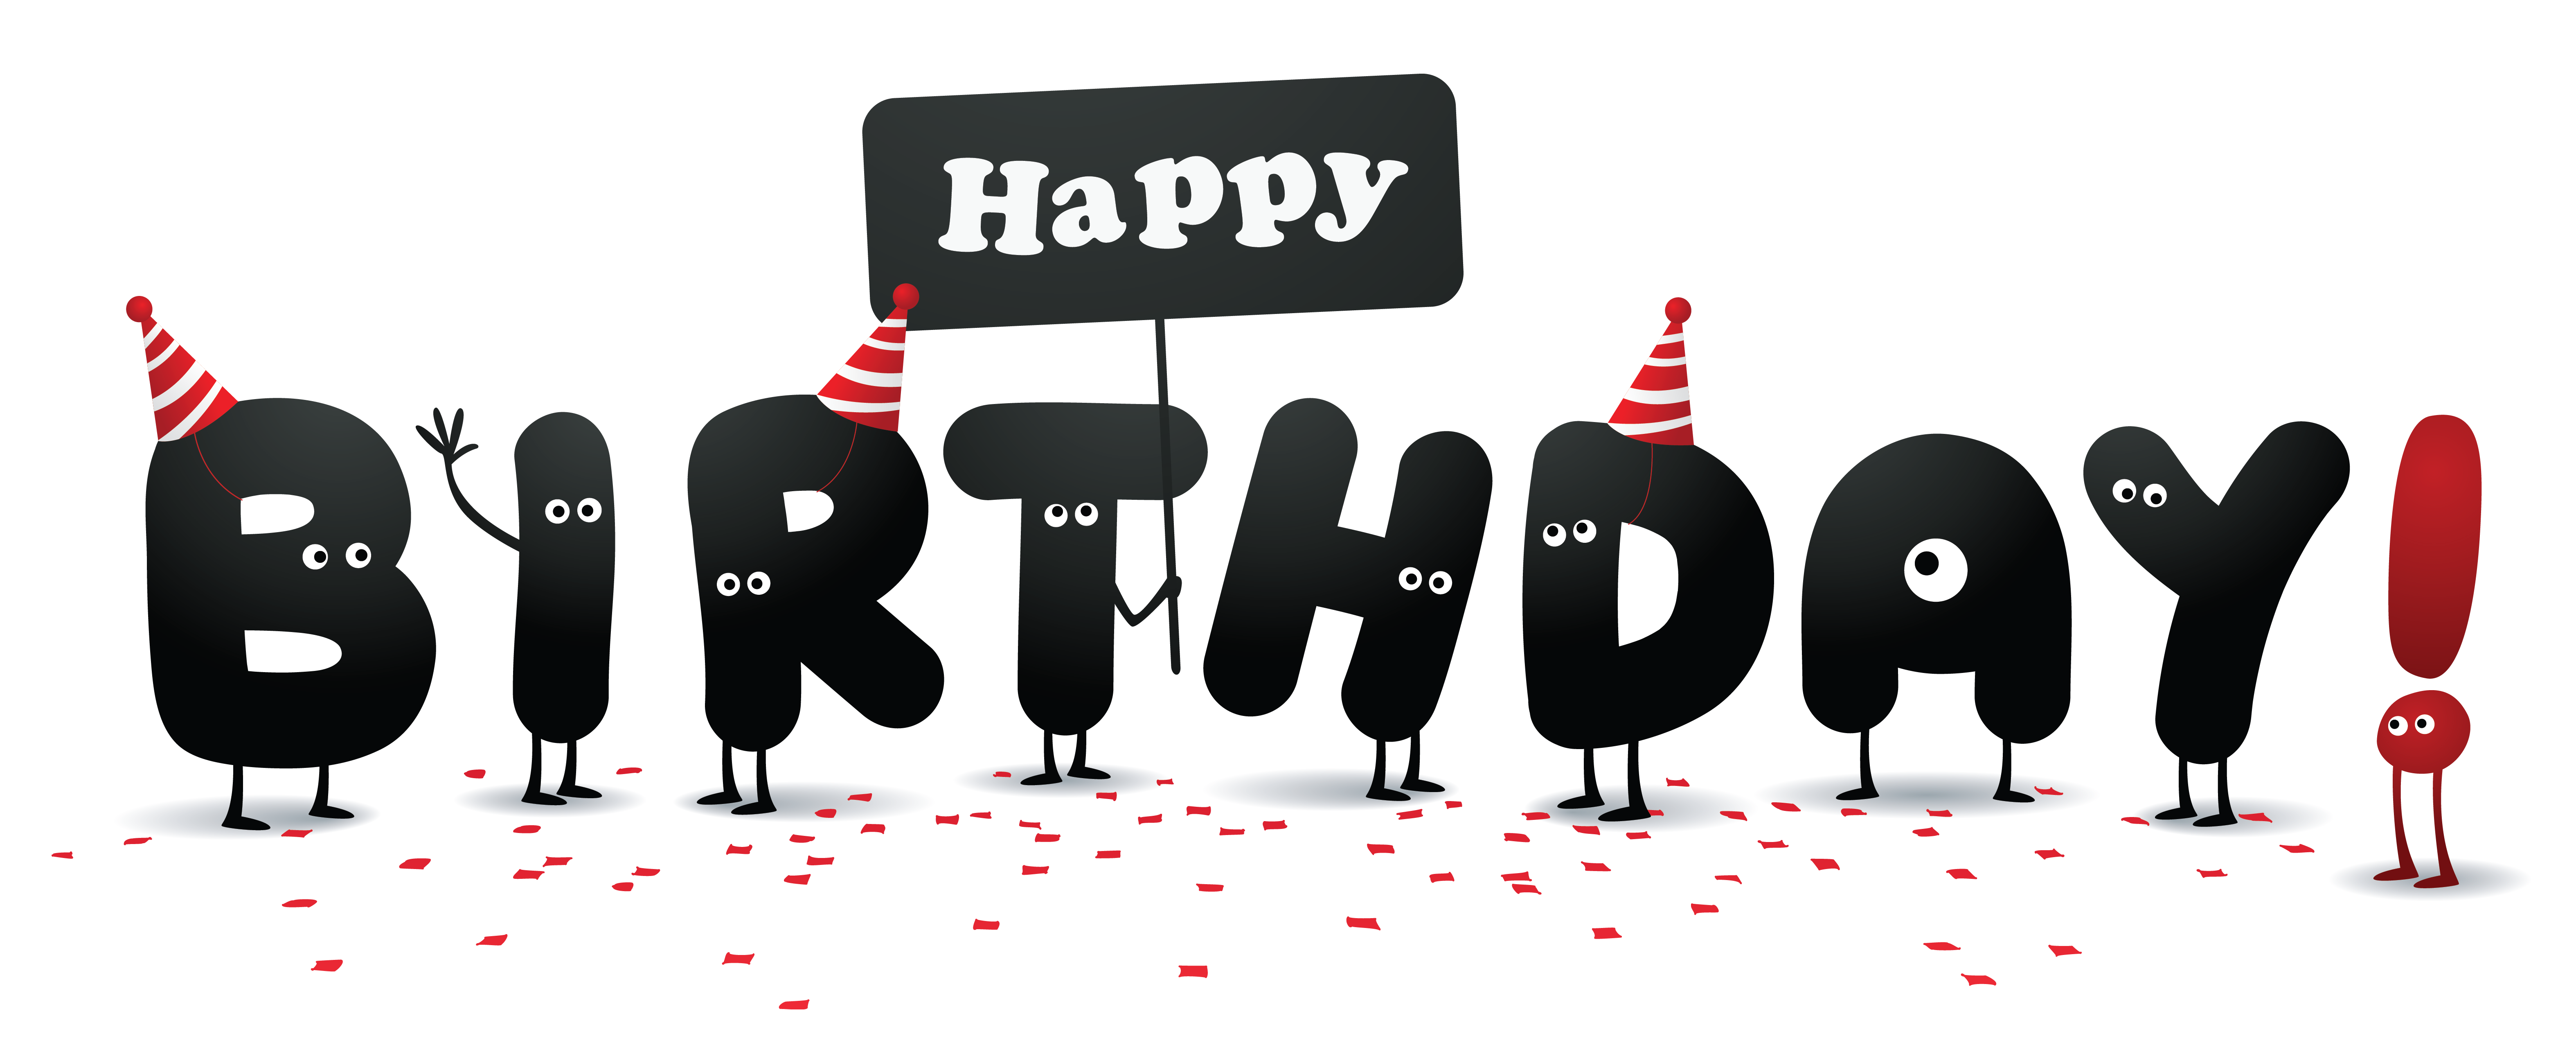 Happy Friday PNG HD Free - 141120